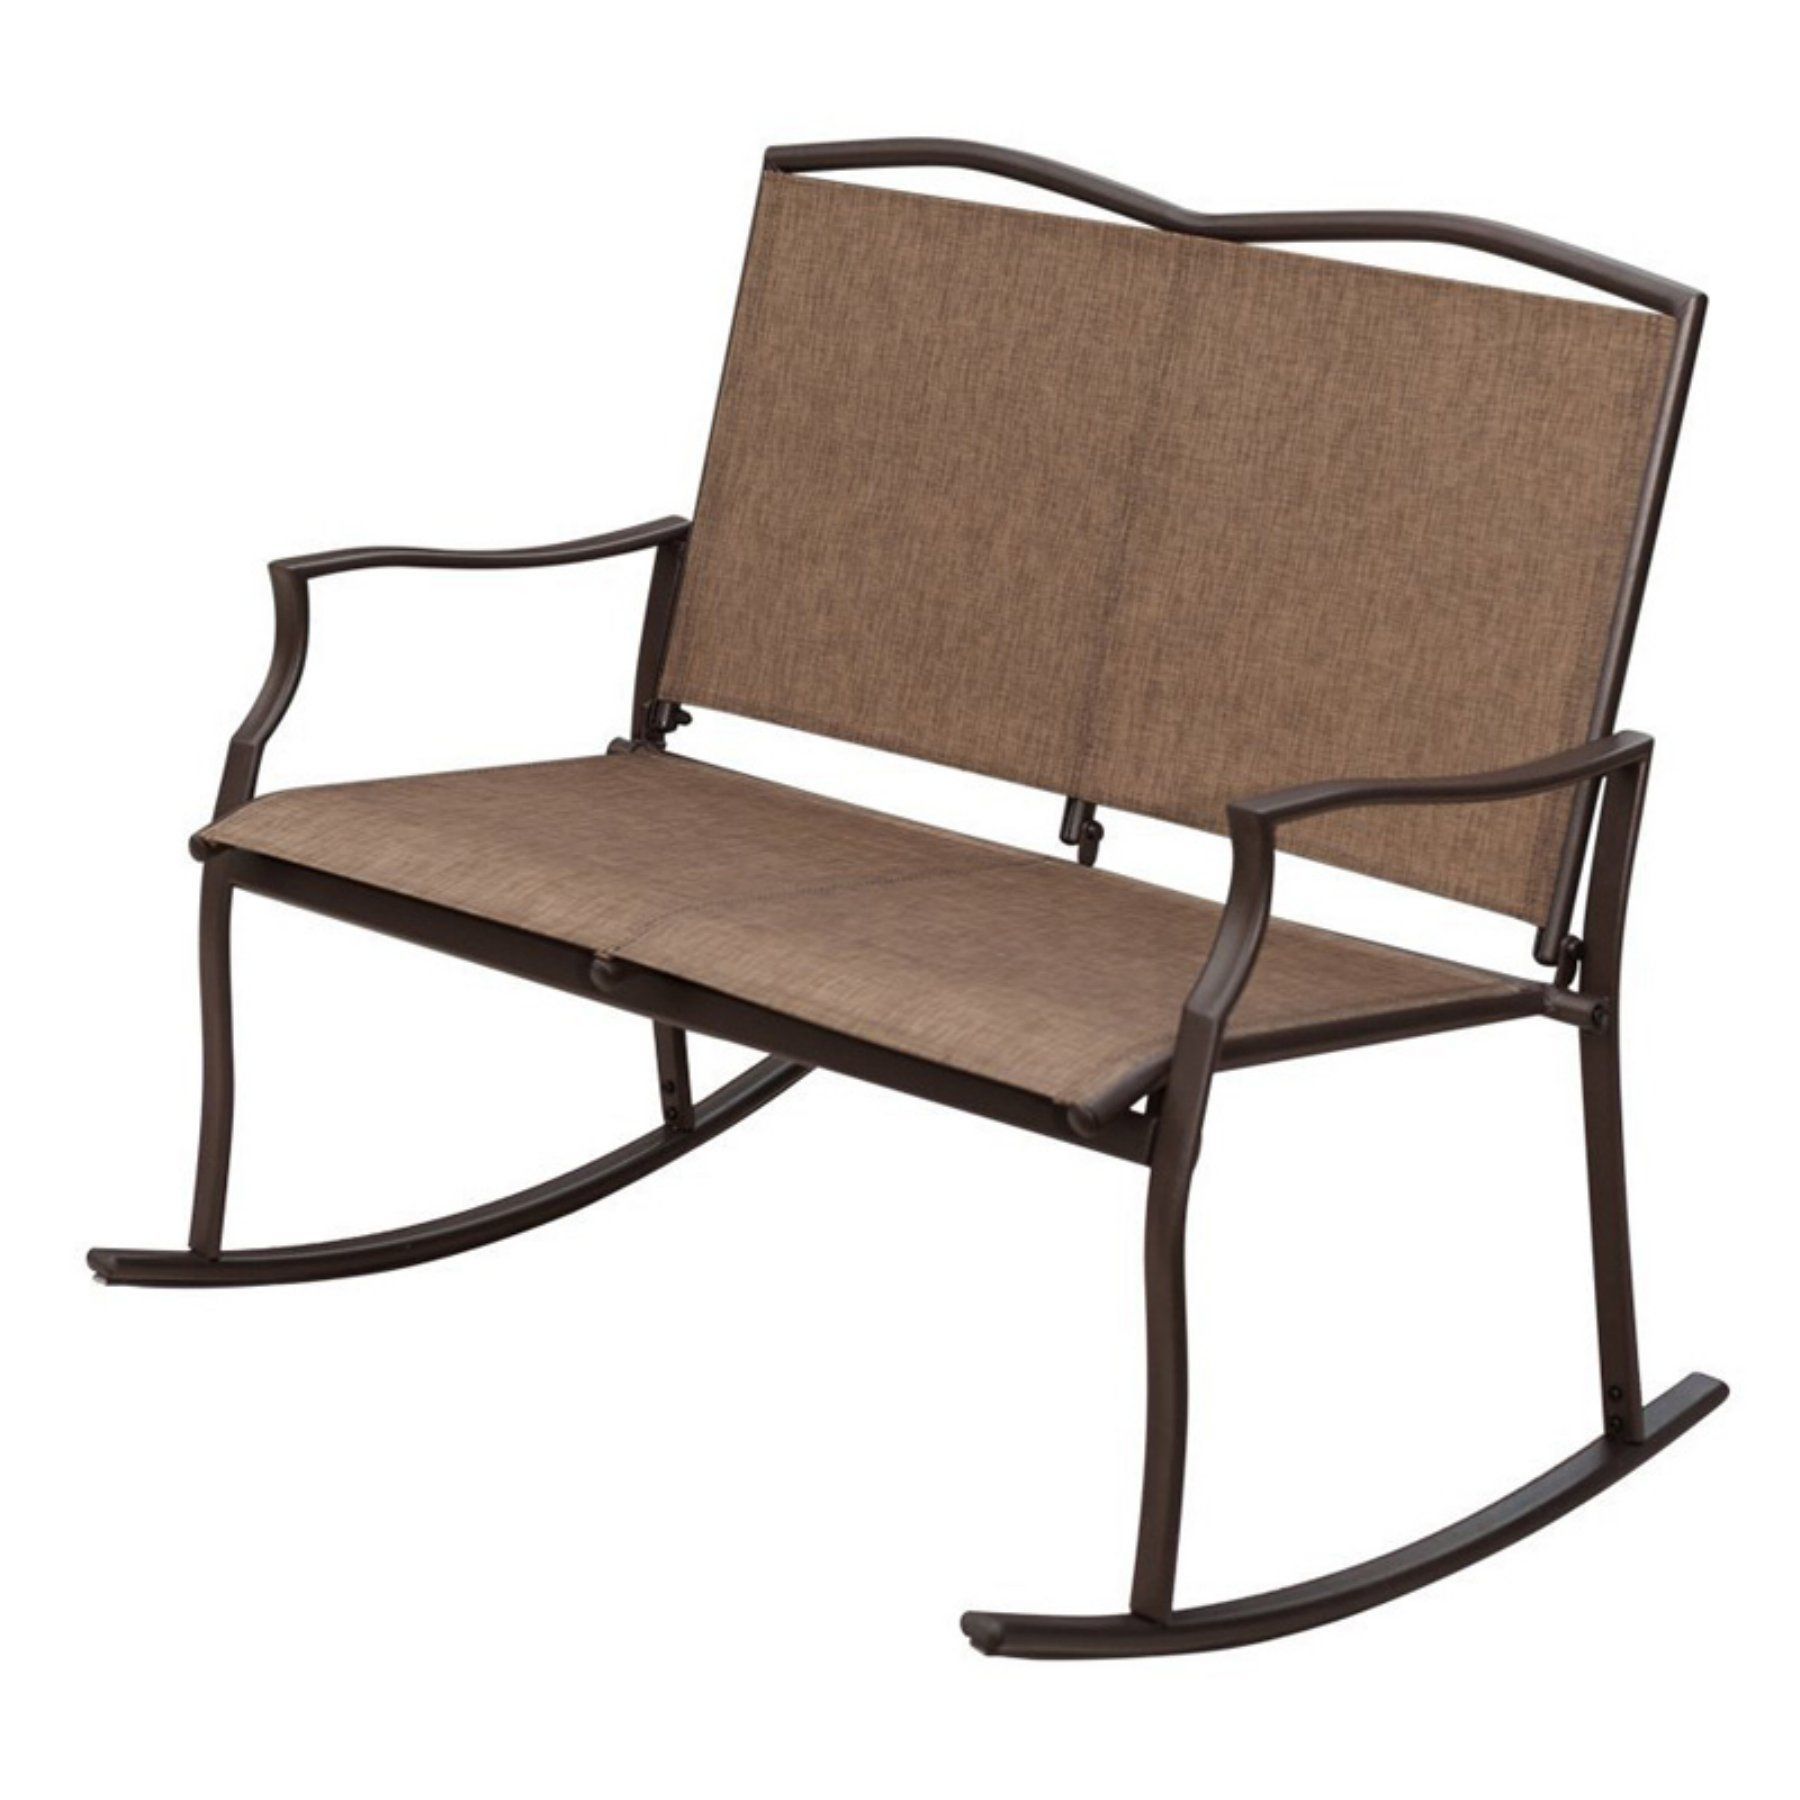 Sunlife Garden Party Sling Loveseat Double Outdoor Rocking Pertaining To Padded Sling Double Gliders (View 6 of 25)